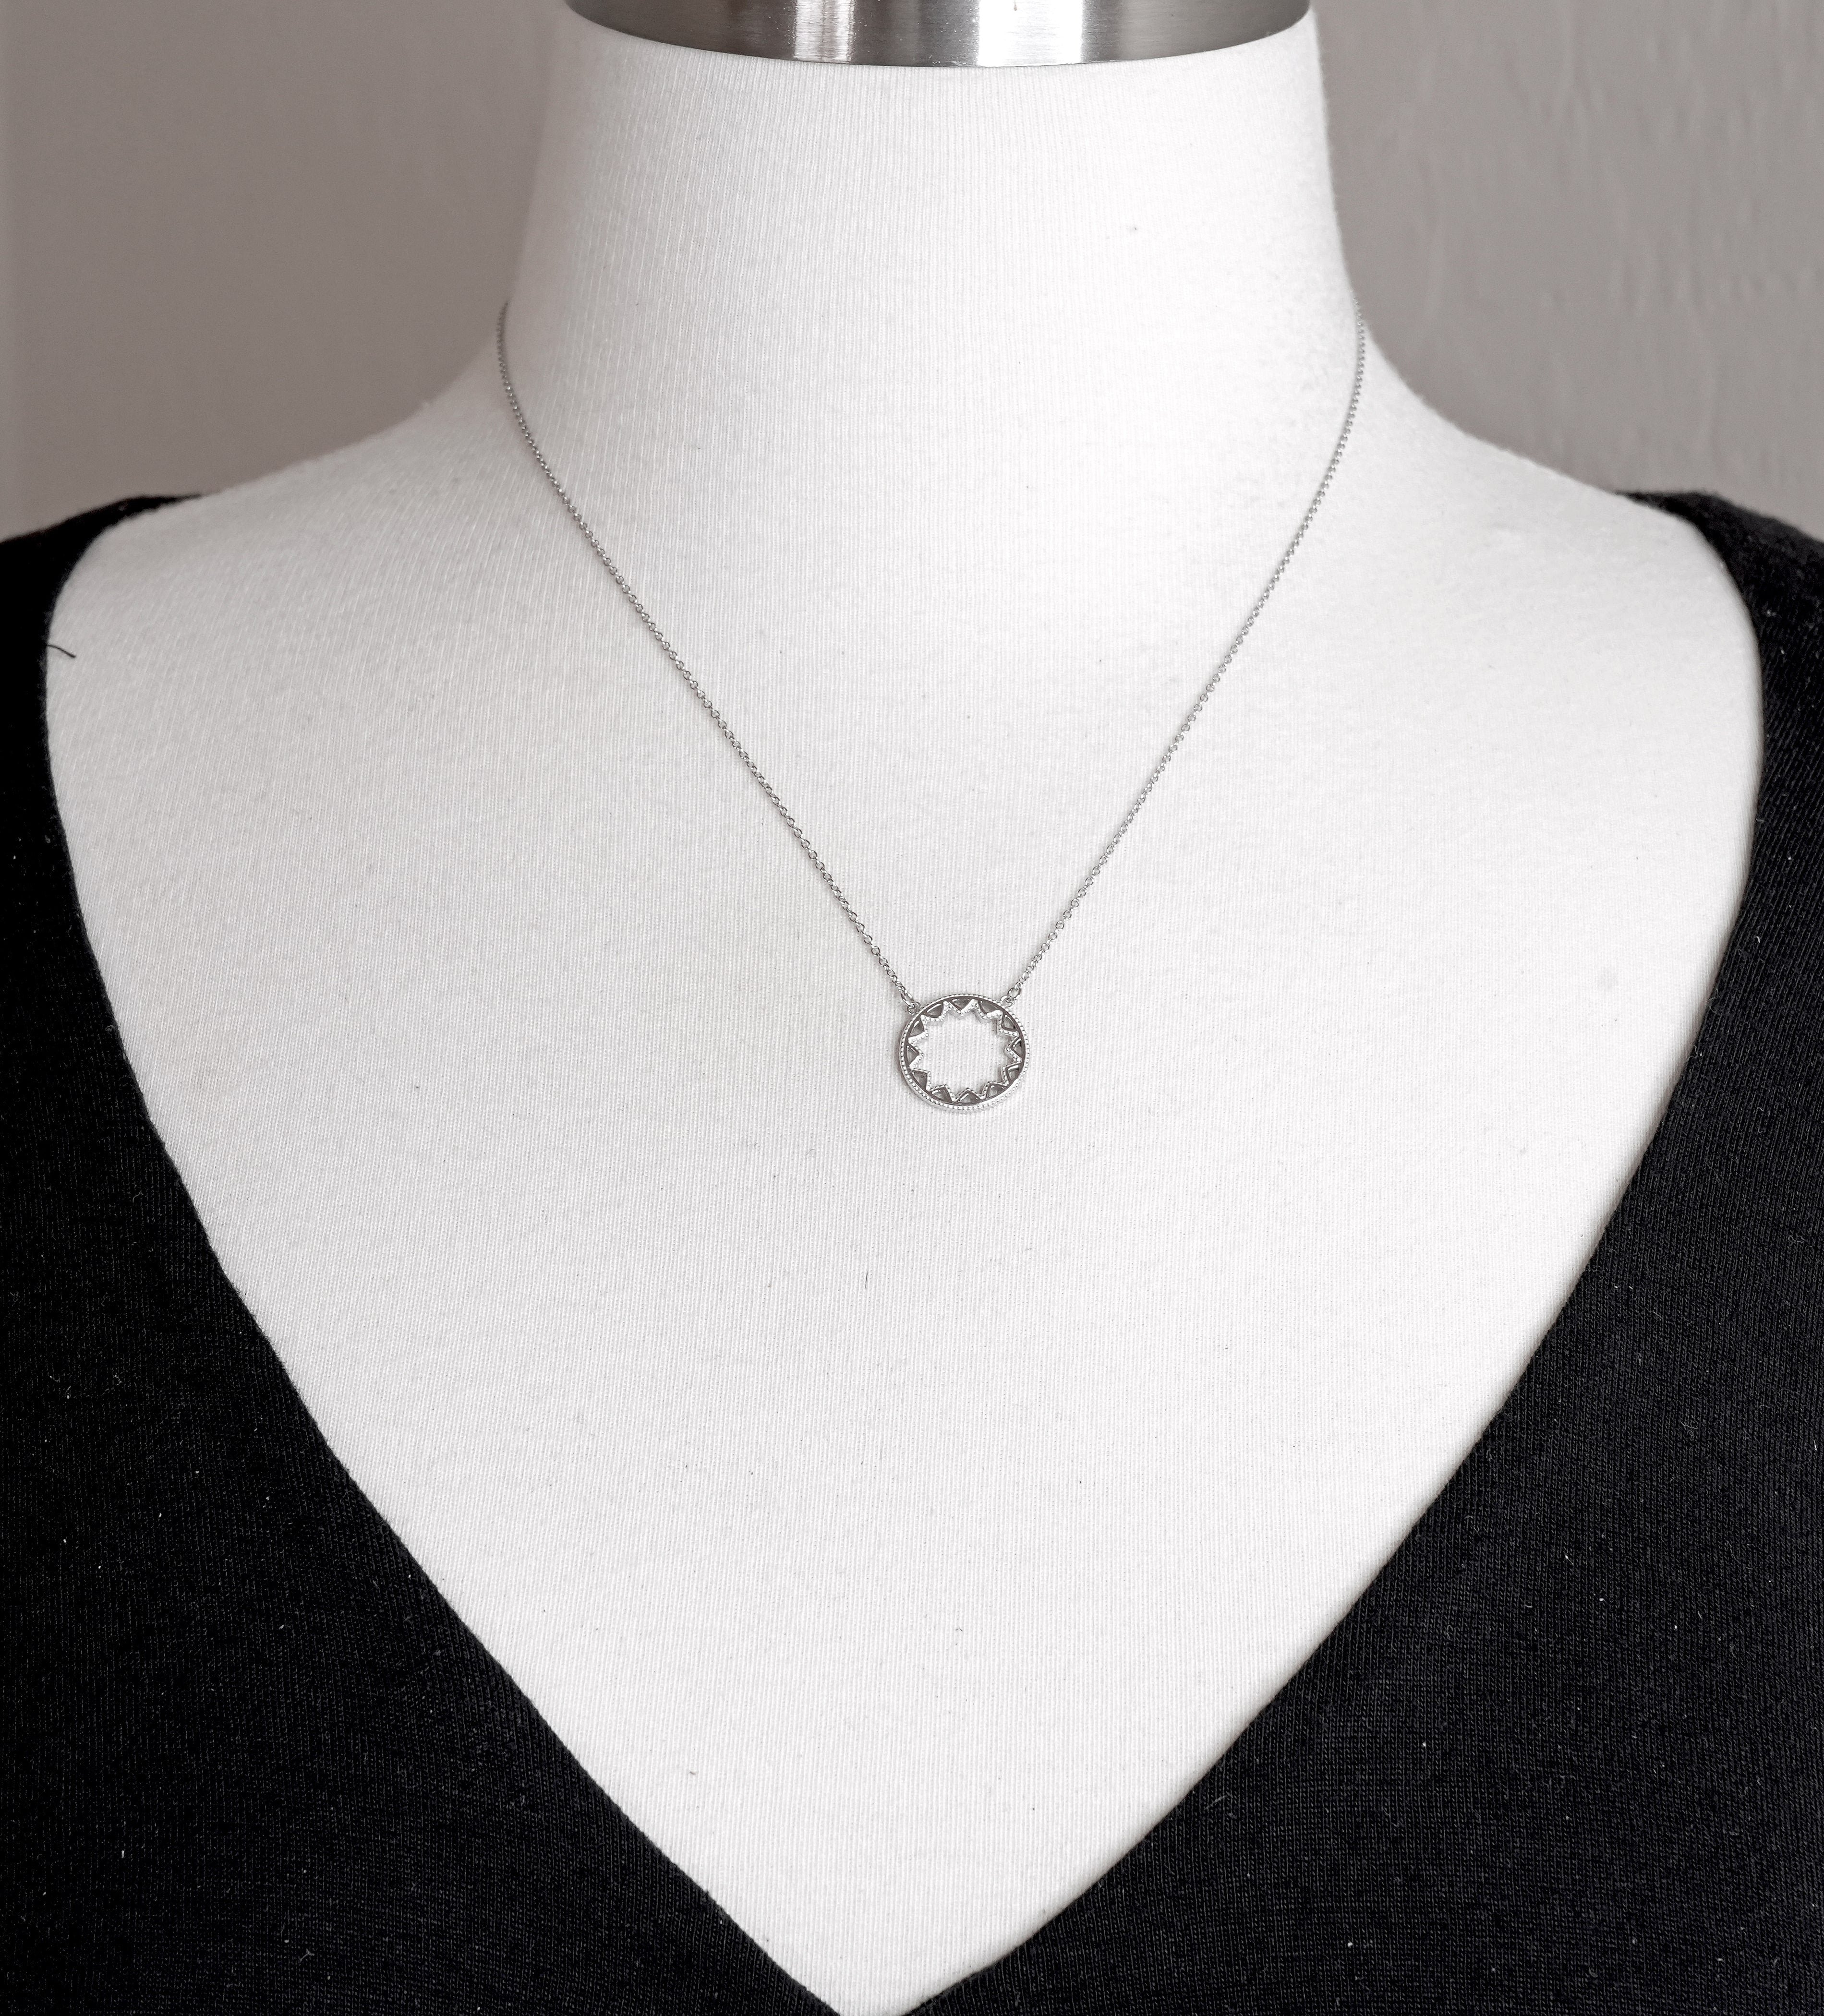 Platinum or 14k Gold or Sterling Silver Geo Style Sun Necklace